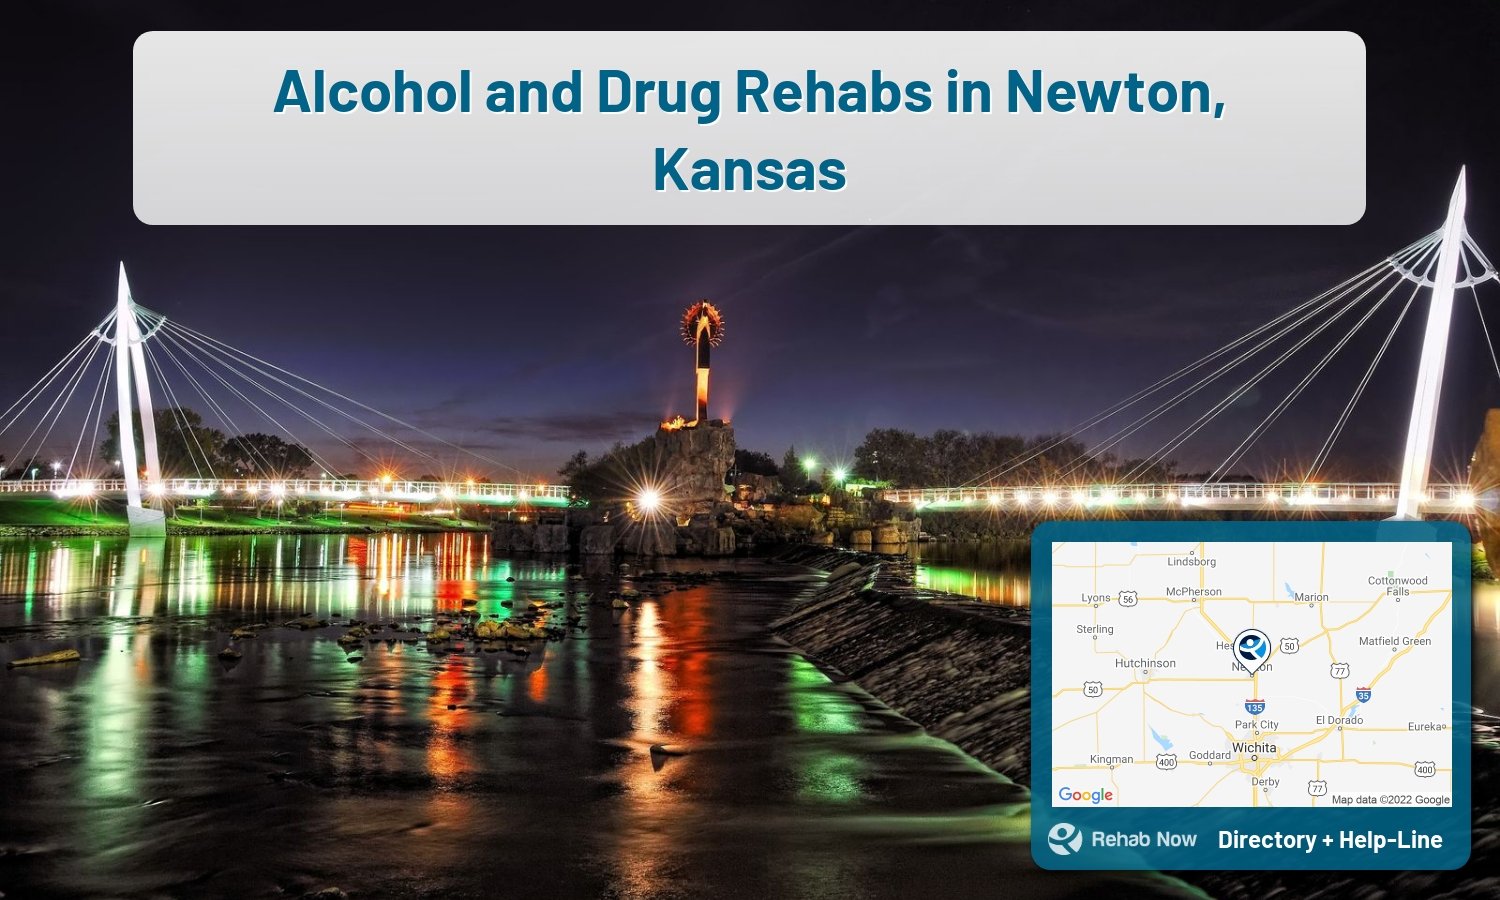 View options, availability, treatment methods, and more, for drug rehab and alcohol treatment in Newton, Kansas